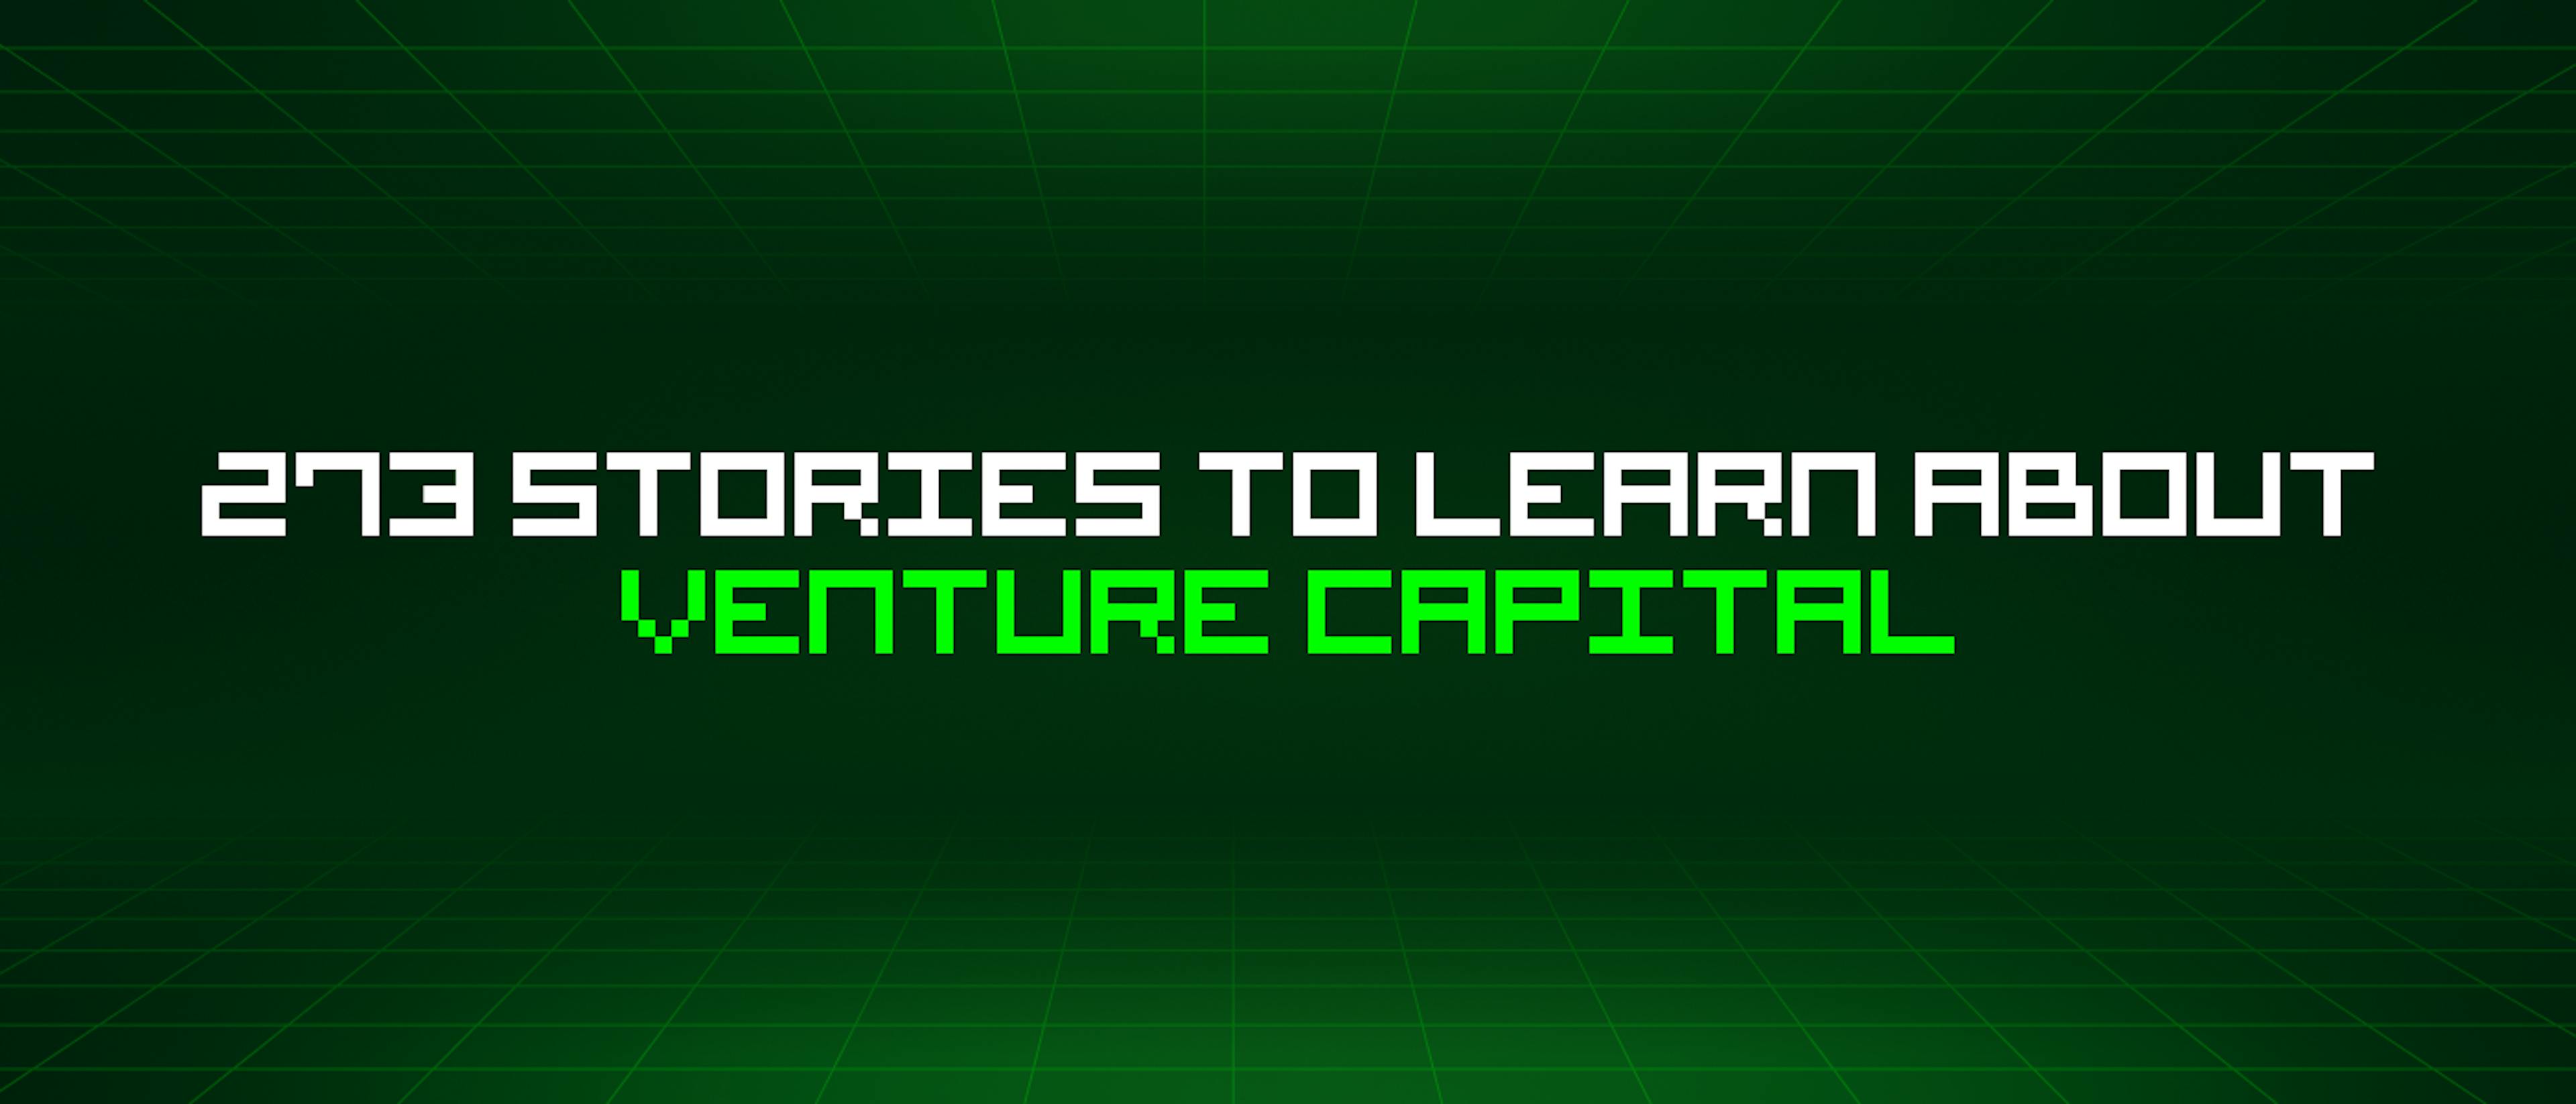 featured image - 273 Stories To Learn About Venture Capital